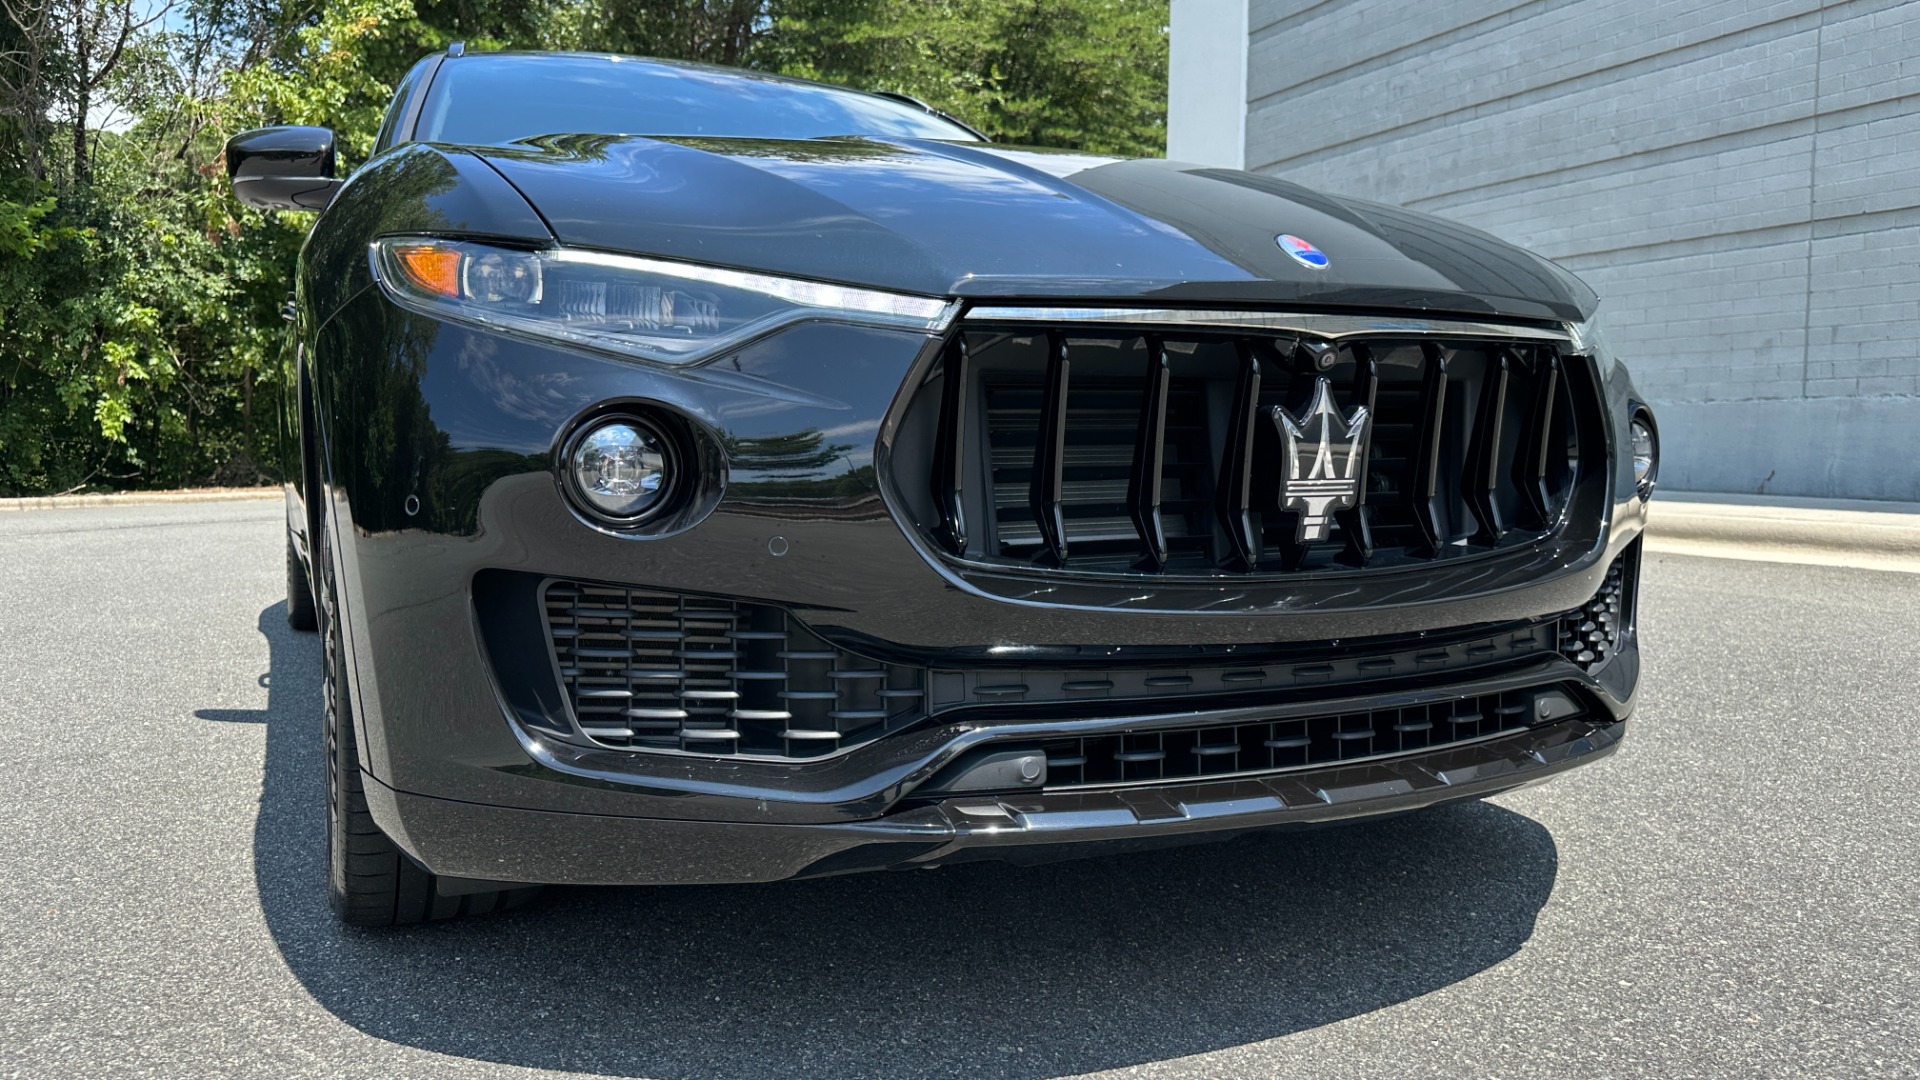 Used 2019 Maserati Levante HK SOUND / GLOSS 21IN WHEELS / PANORAMIC ROOF / DRIVER ASSIST / MORE!! for sale $41,995 at Formula Imports in Charlotte NC 28227 6